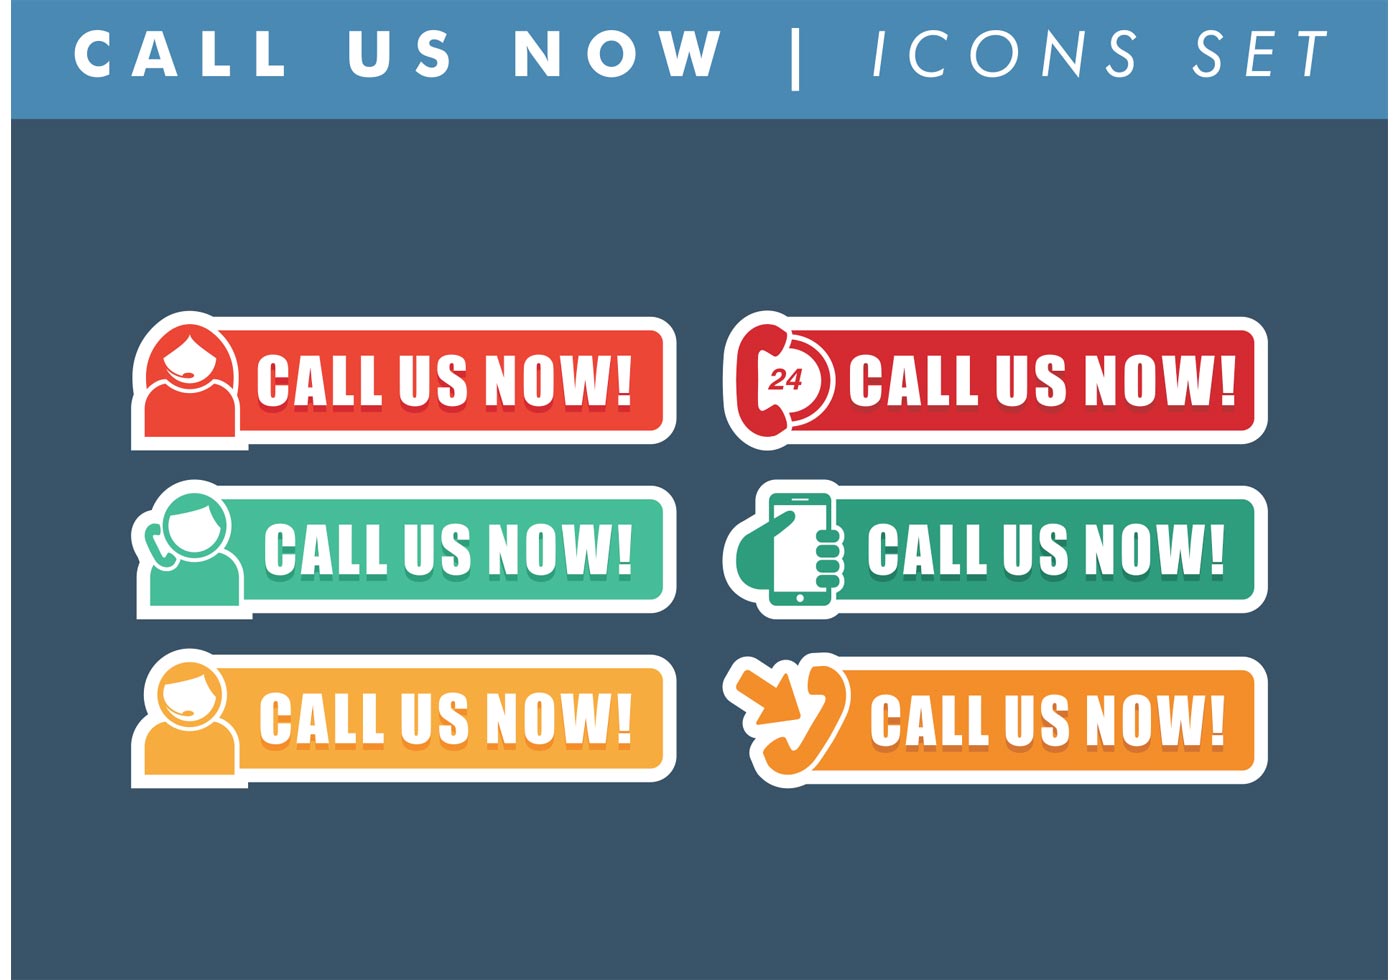 Call us. Call us Now icon PNG. Call us now